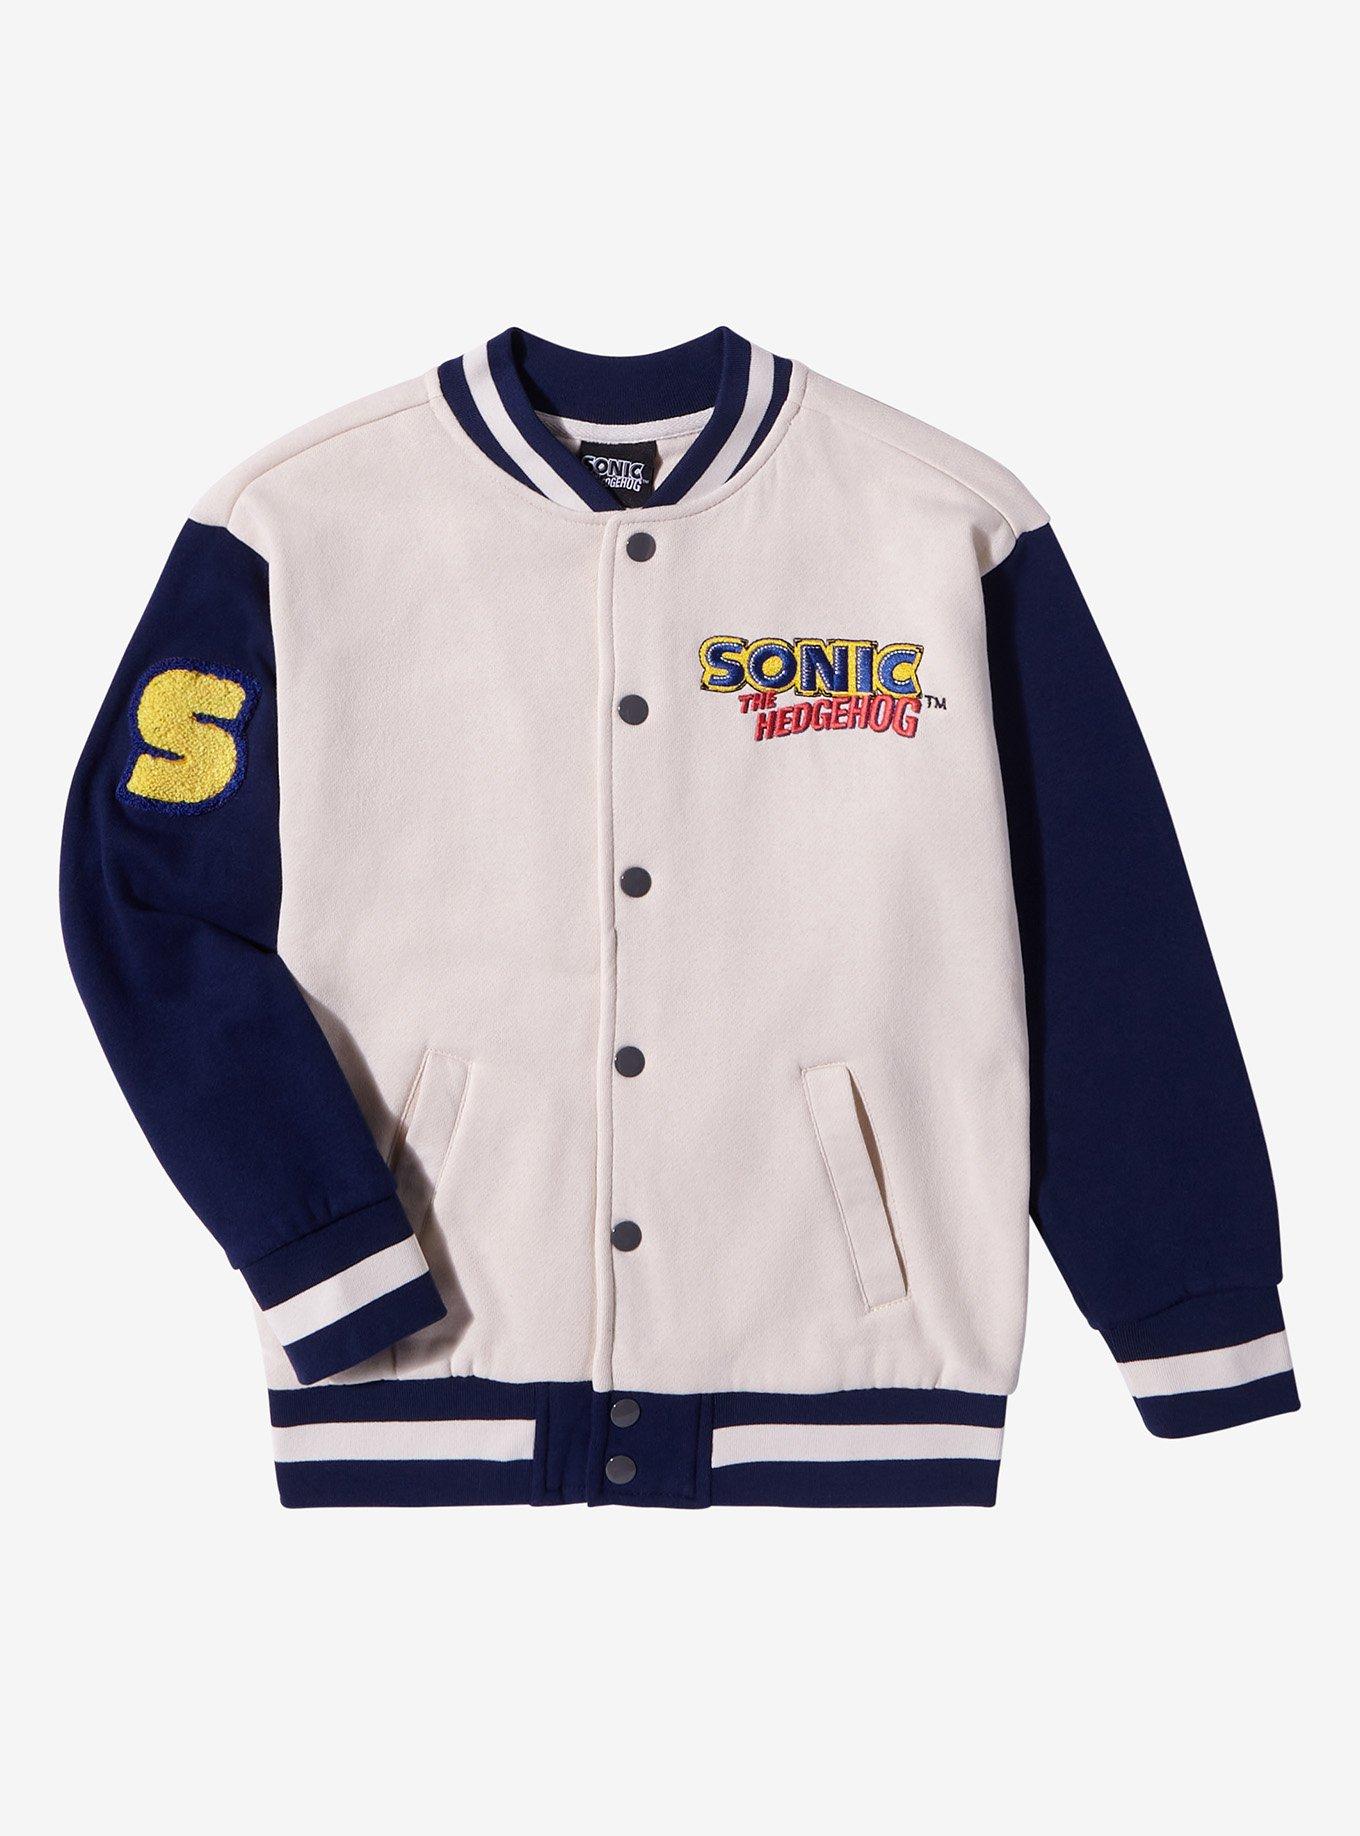 Sonic the Hedgehog Team Sonic Youth Varsity Jacket - BoxLunch Exclusive, BEIGE, hi-res